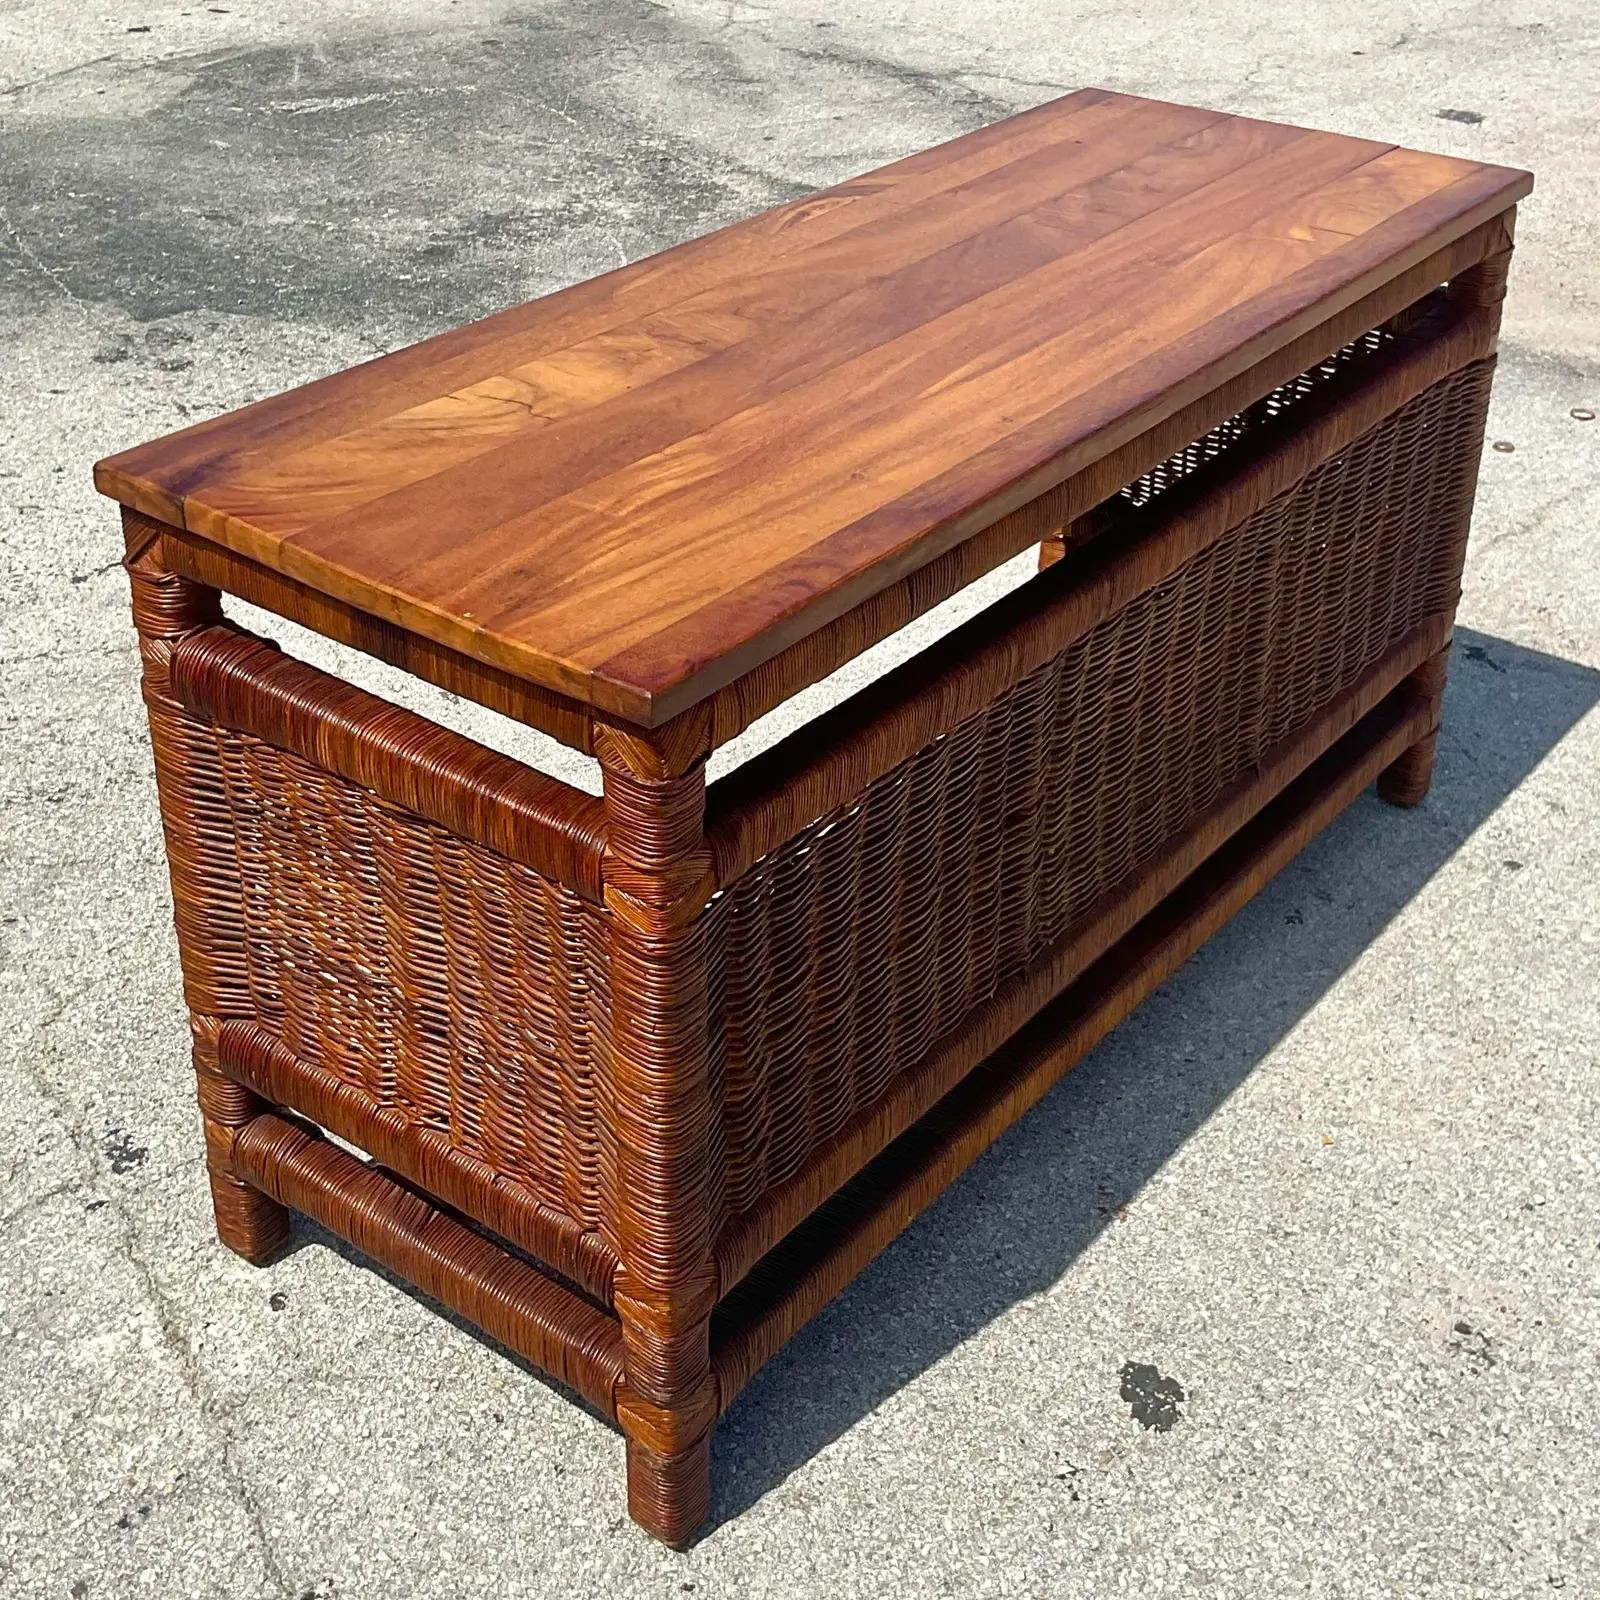 Fantastic vintage Coastal desk. A beautiful woven rattan with a wood plank top. Fabulous wood grain detail to the top. Acquired from a Palm Beach estate.